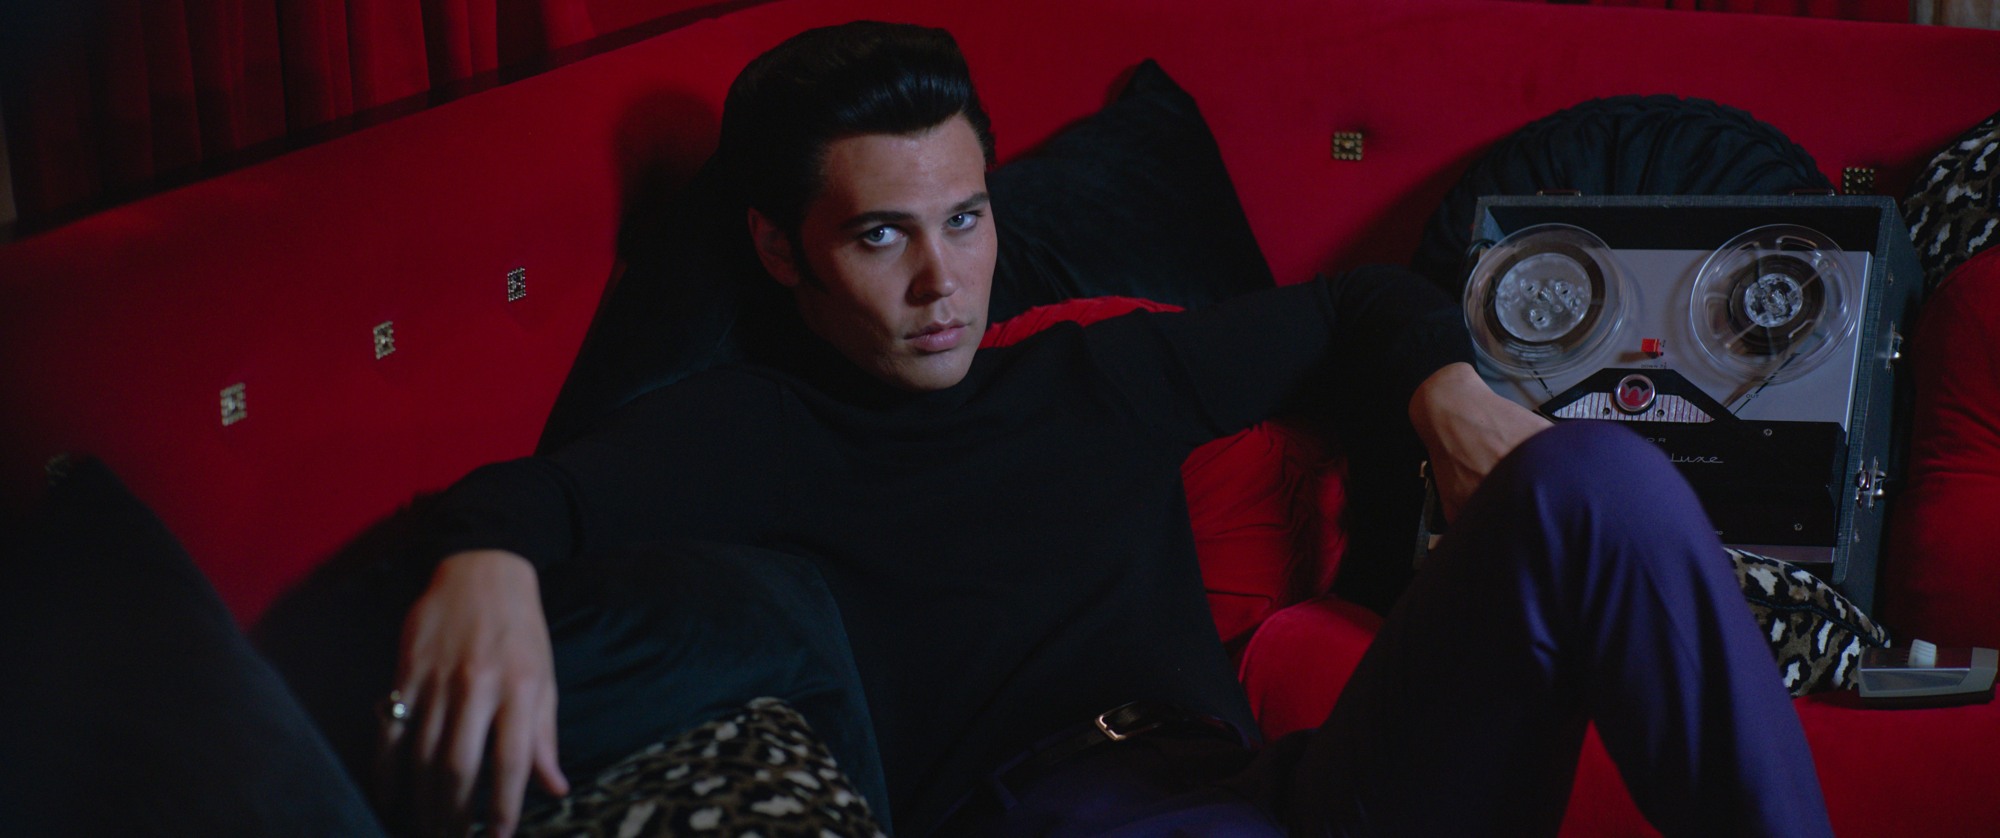 Oscars 2023 Best Picture nominee 'Elvis' Austin Butler as Elvis Presley laying back on a red couch.